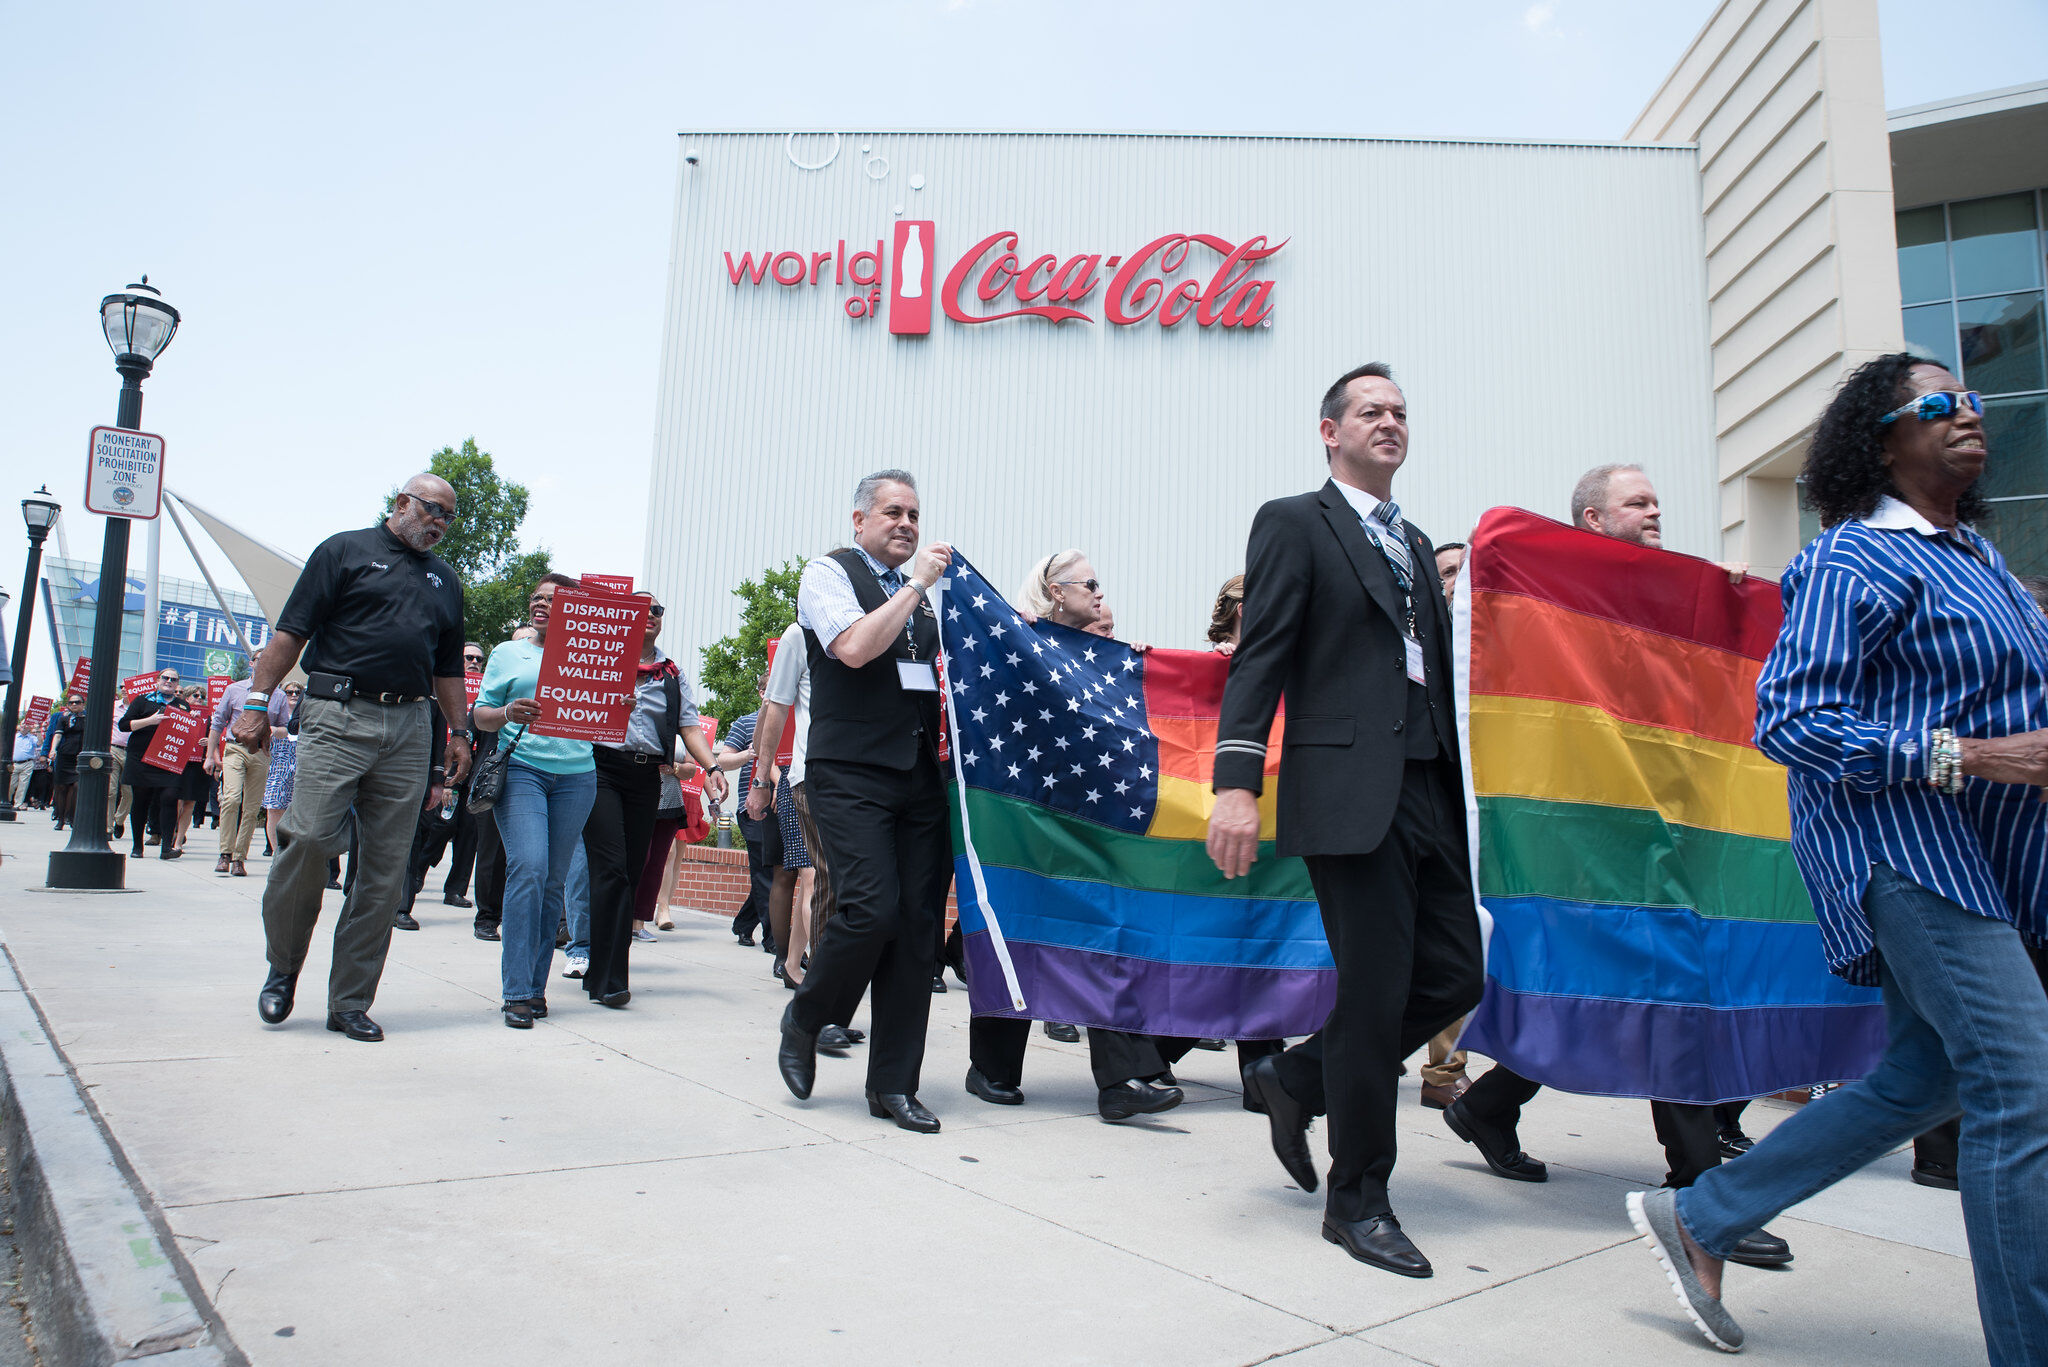 AFA members protested Delta on a number of issues in 2016 - including LGBTQ equality measures.